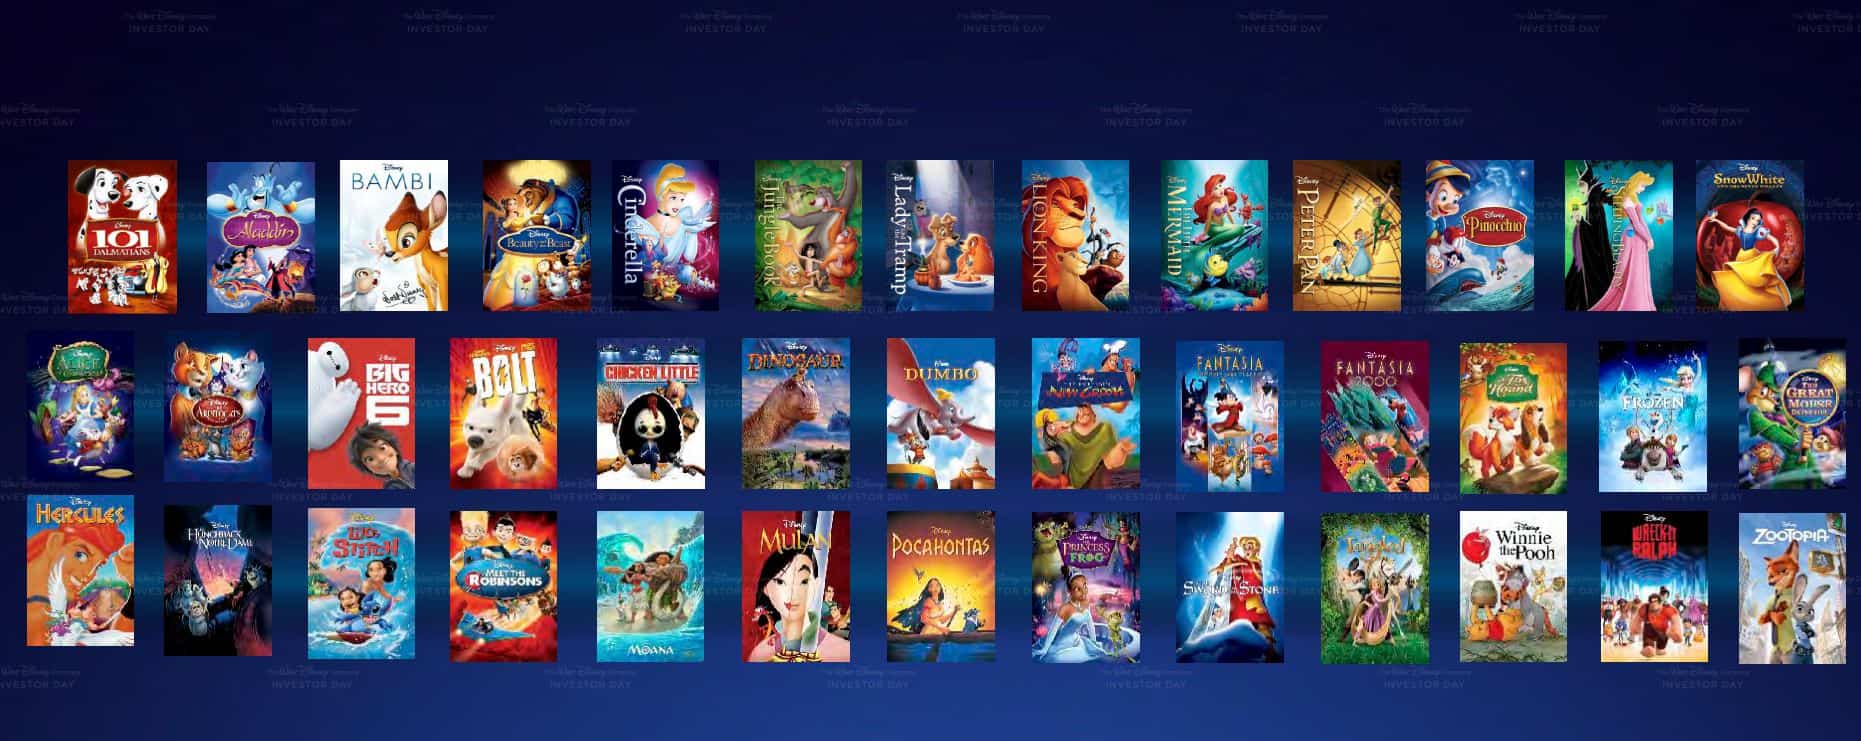 Disney Plus movies and tv shows database